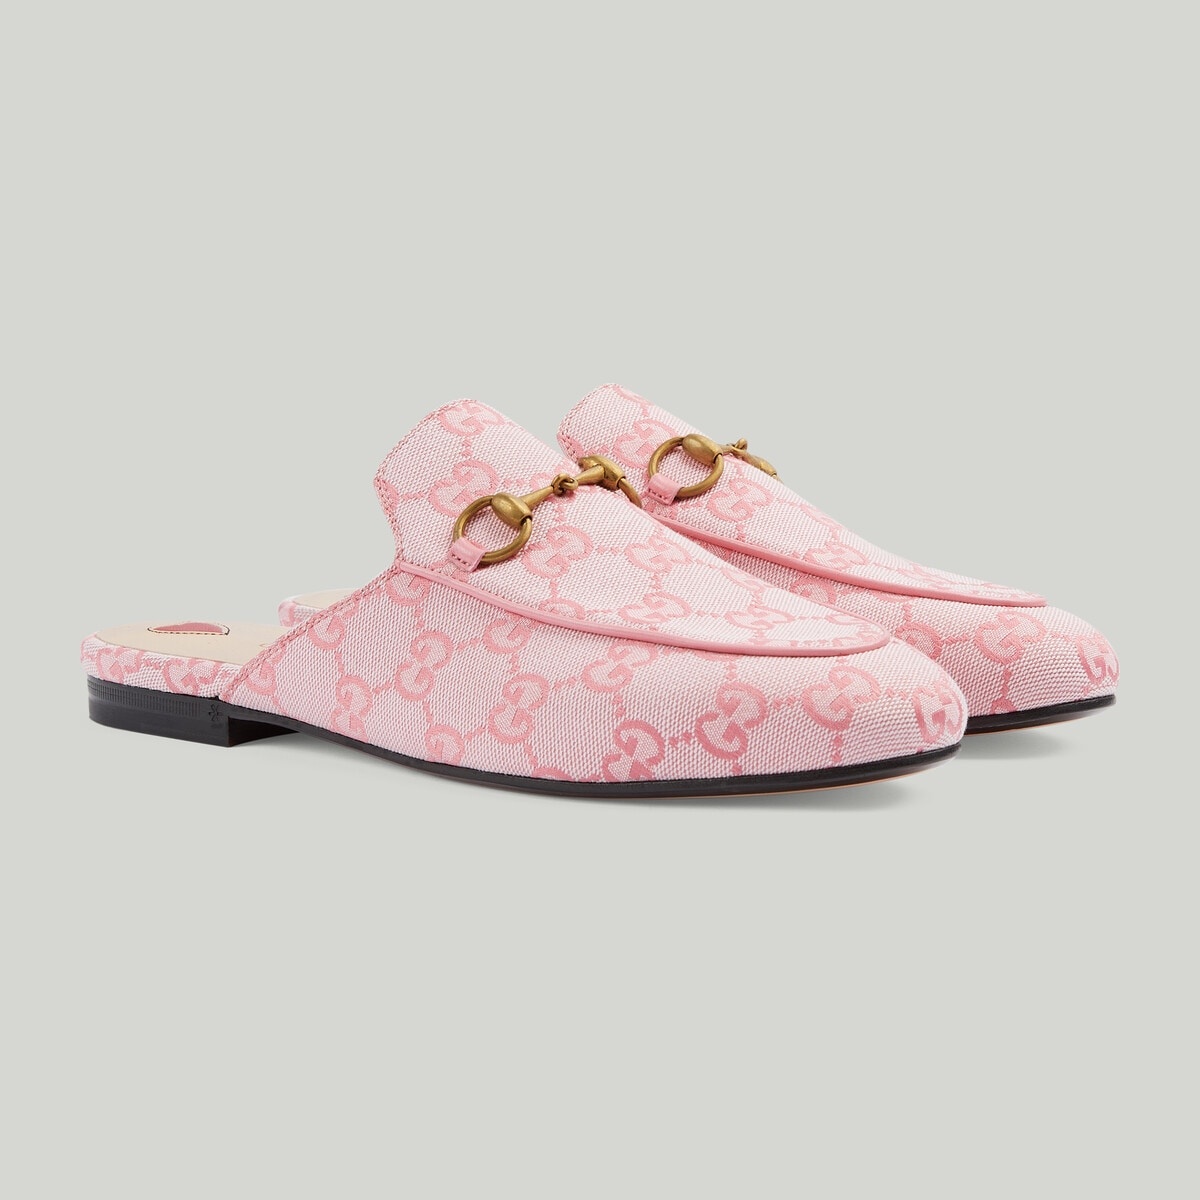 Women's Princetown slipper with GG - 2